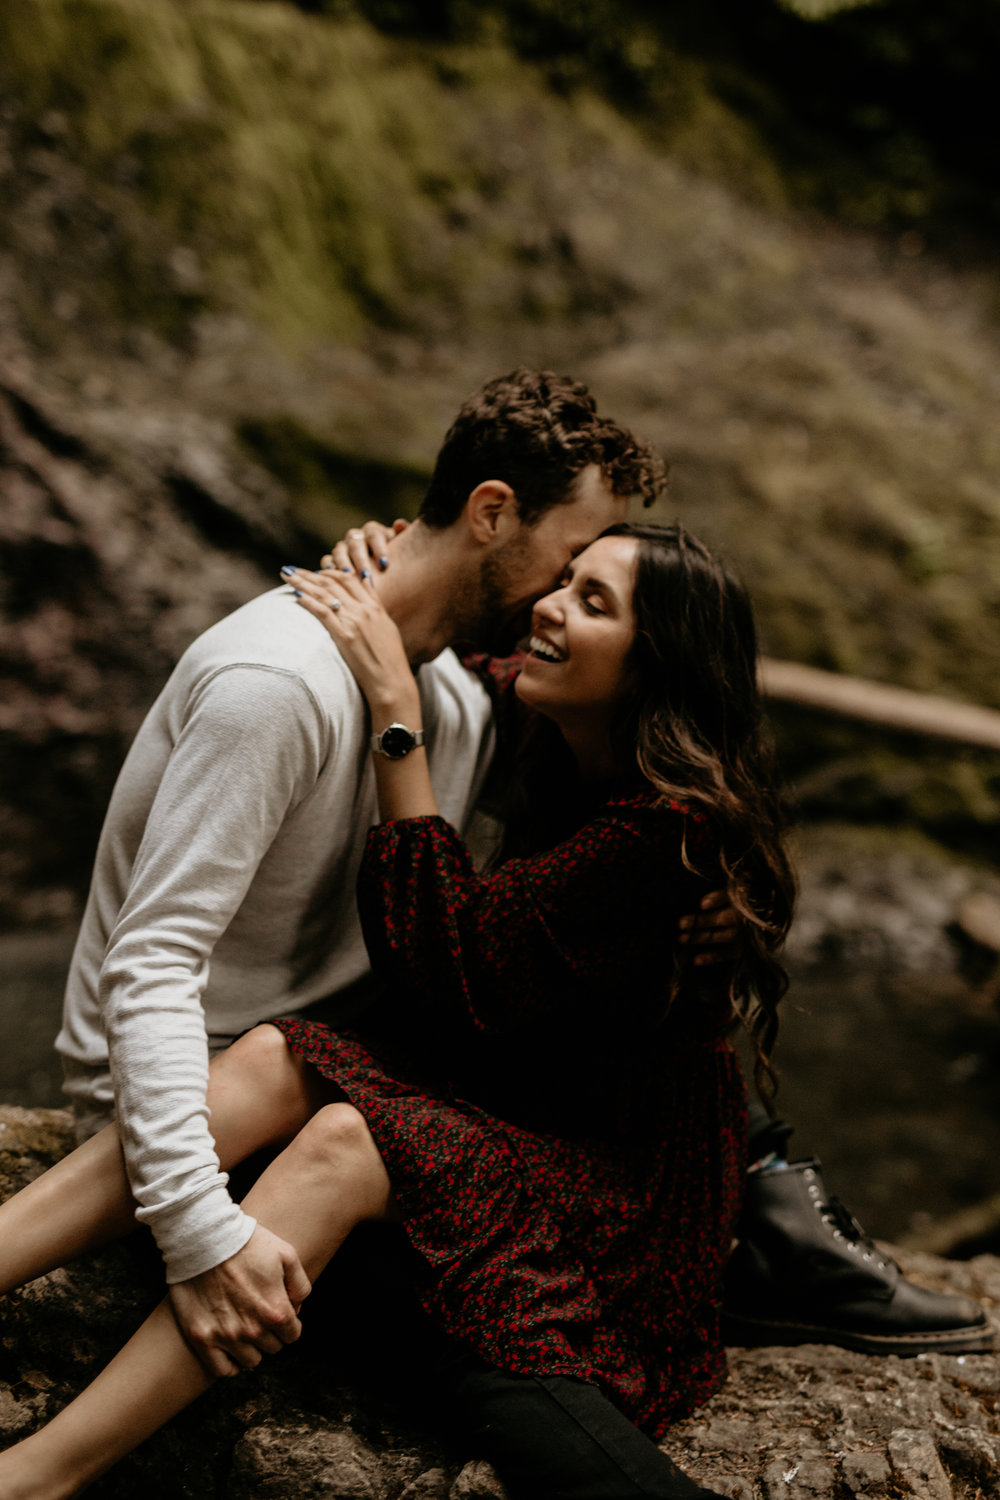 Crescent lake engagement photos – best Seattle elopement photographer - adventure hikes - lake hiking - best engagement photo location - what to wear on your engagement - pnw elopement photographer